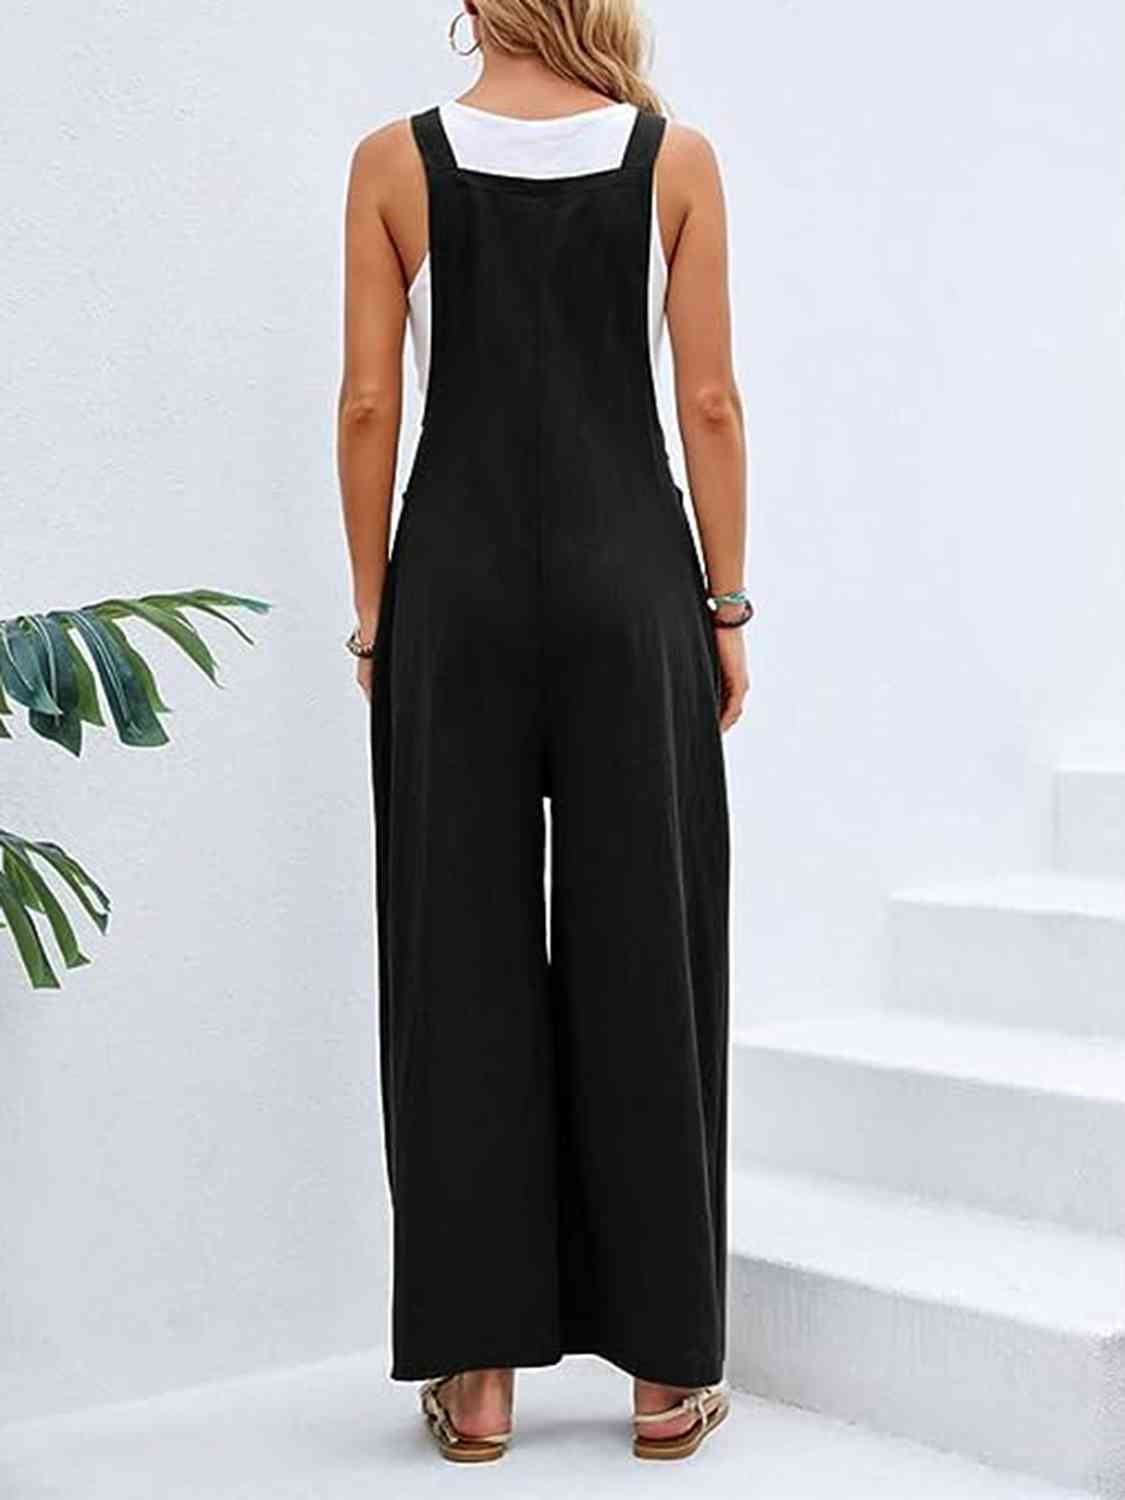 Women’s Full Size Wide Leg Overalls with Pockets